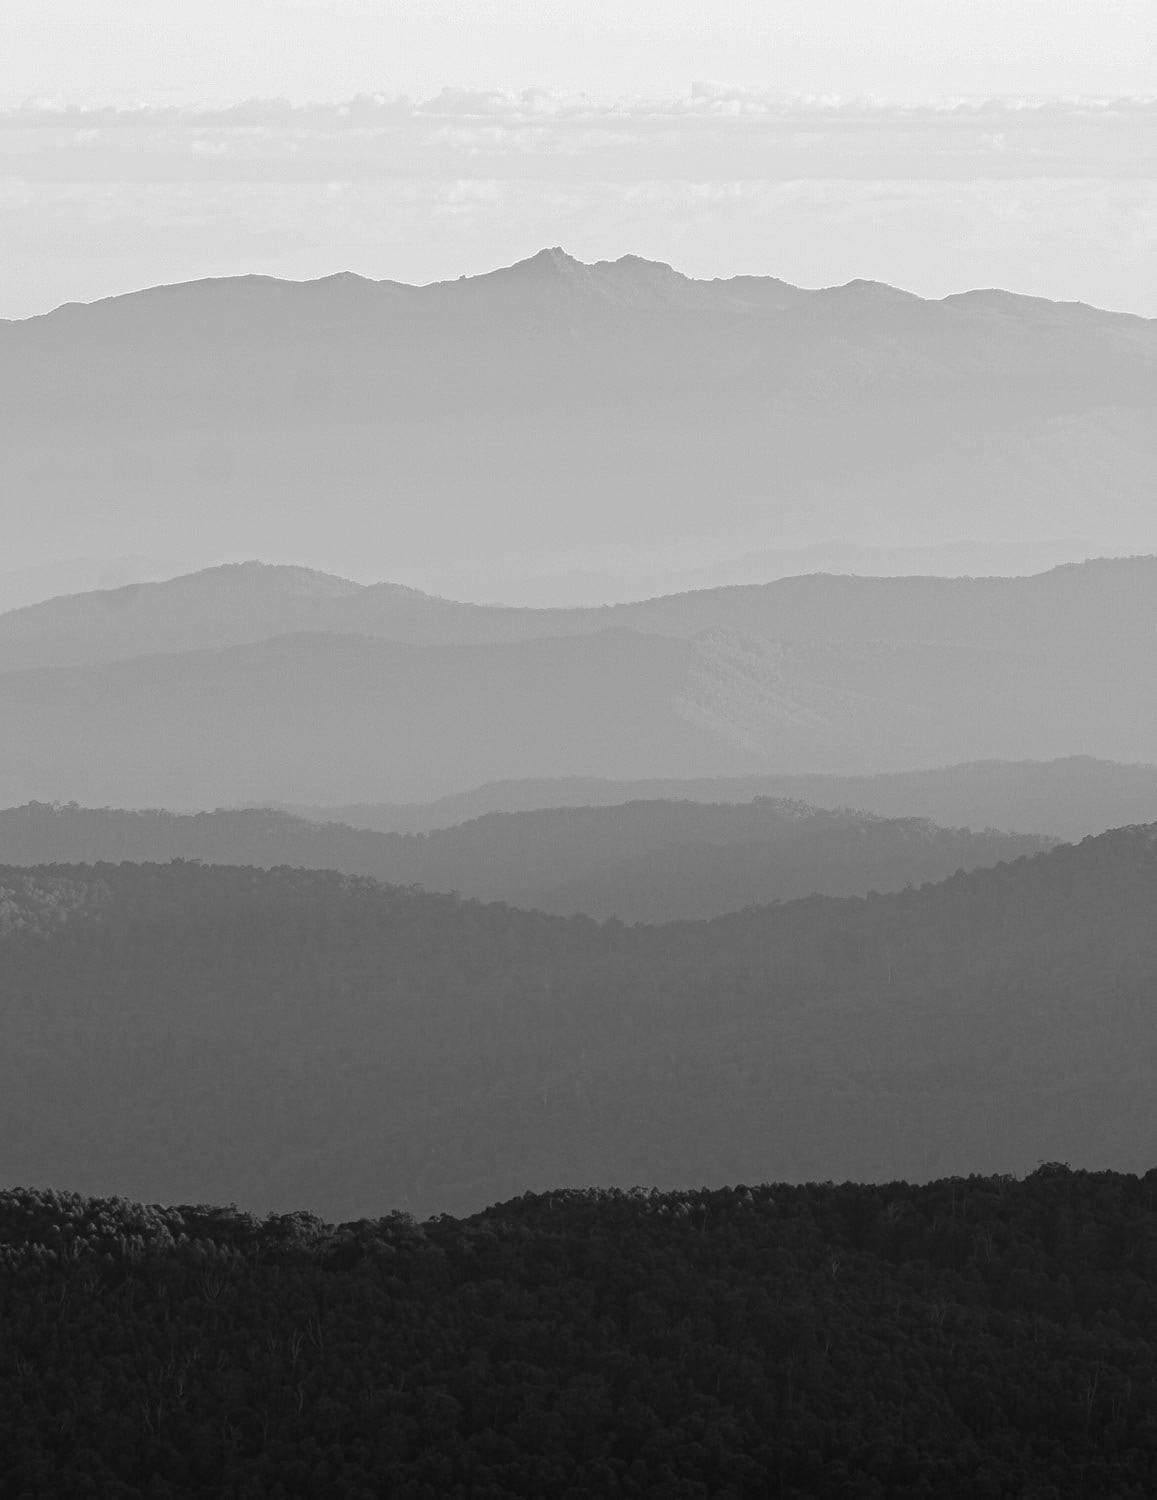 Mountain ranges blurred in snow, Mountain Ranges - Victorian High Country